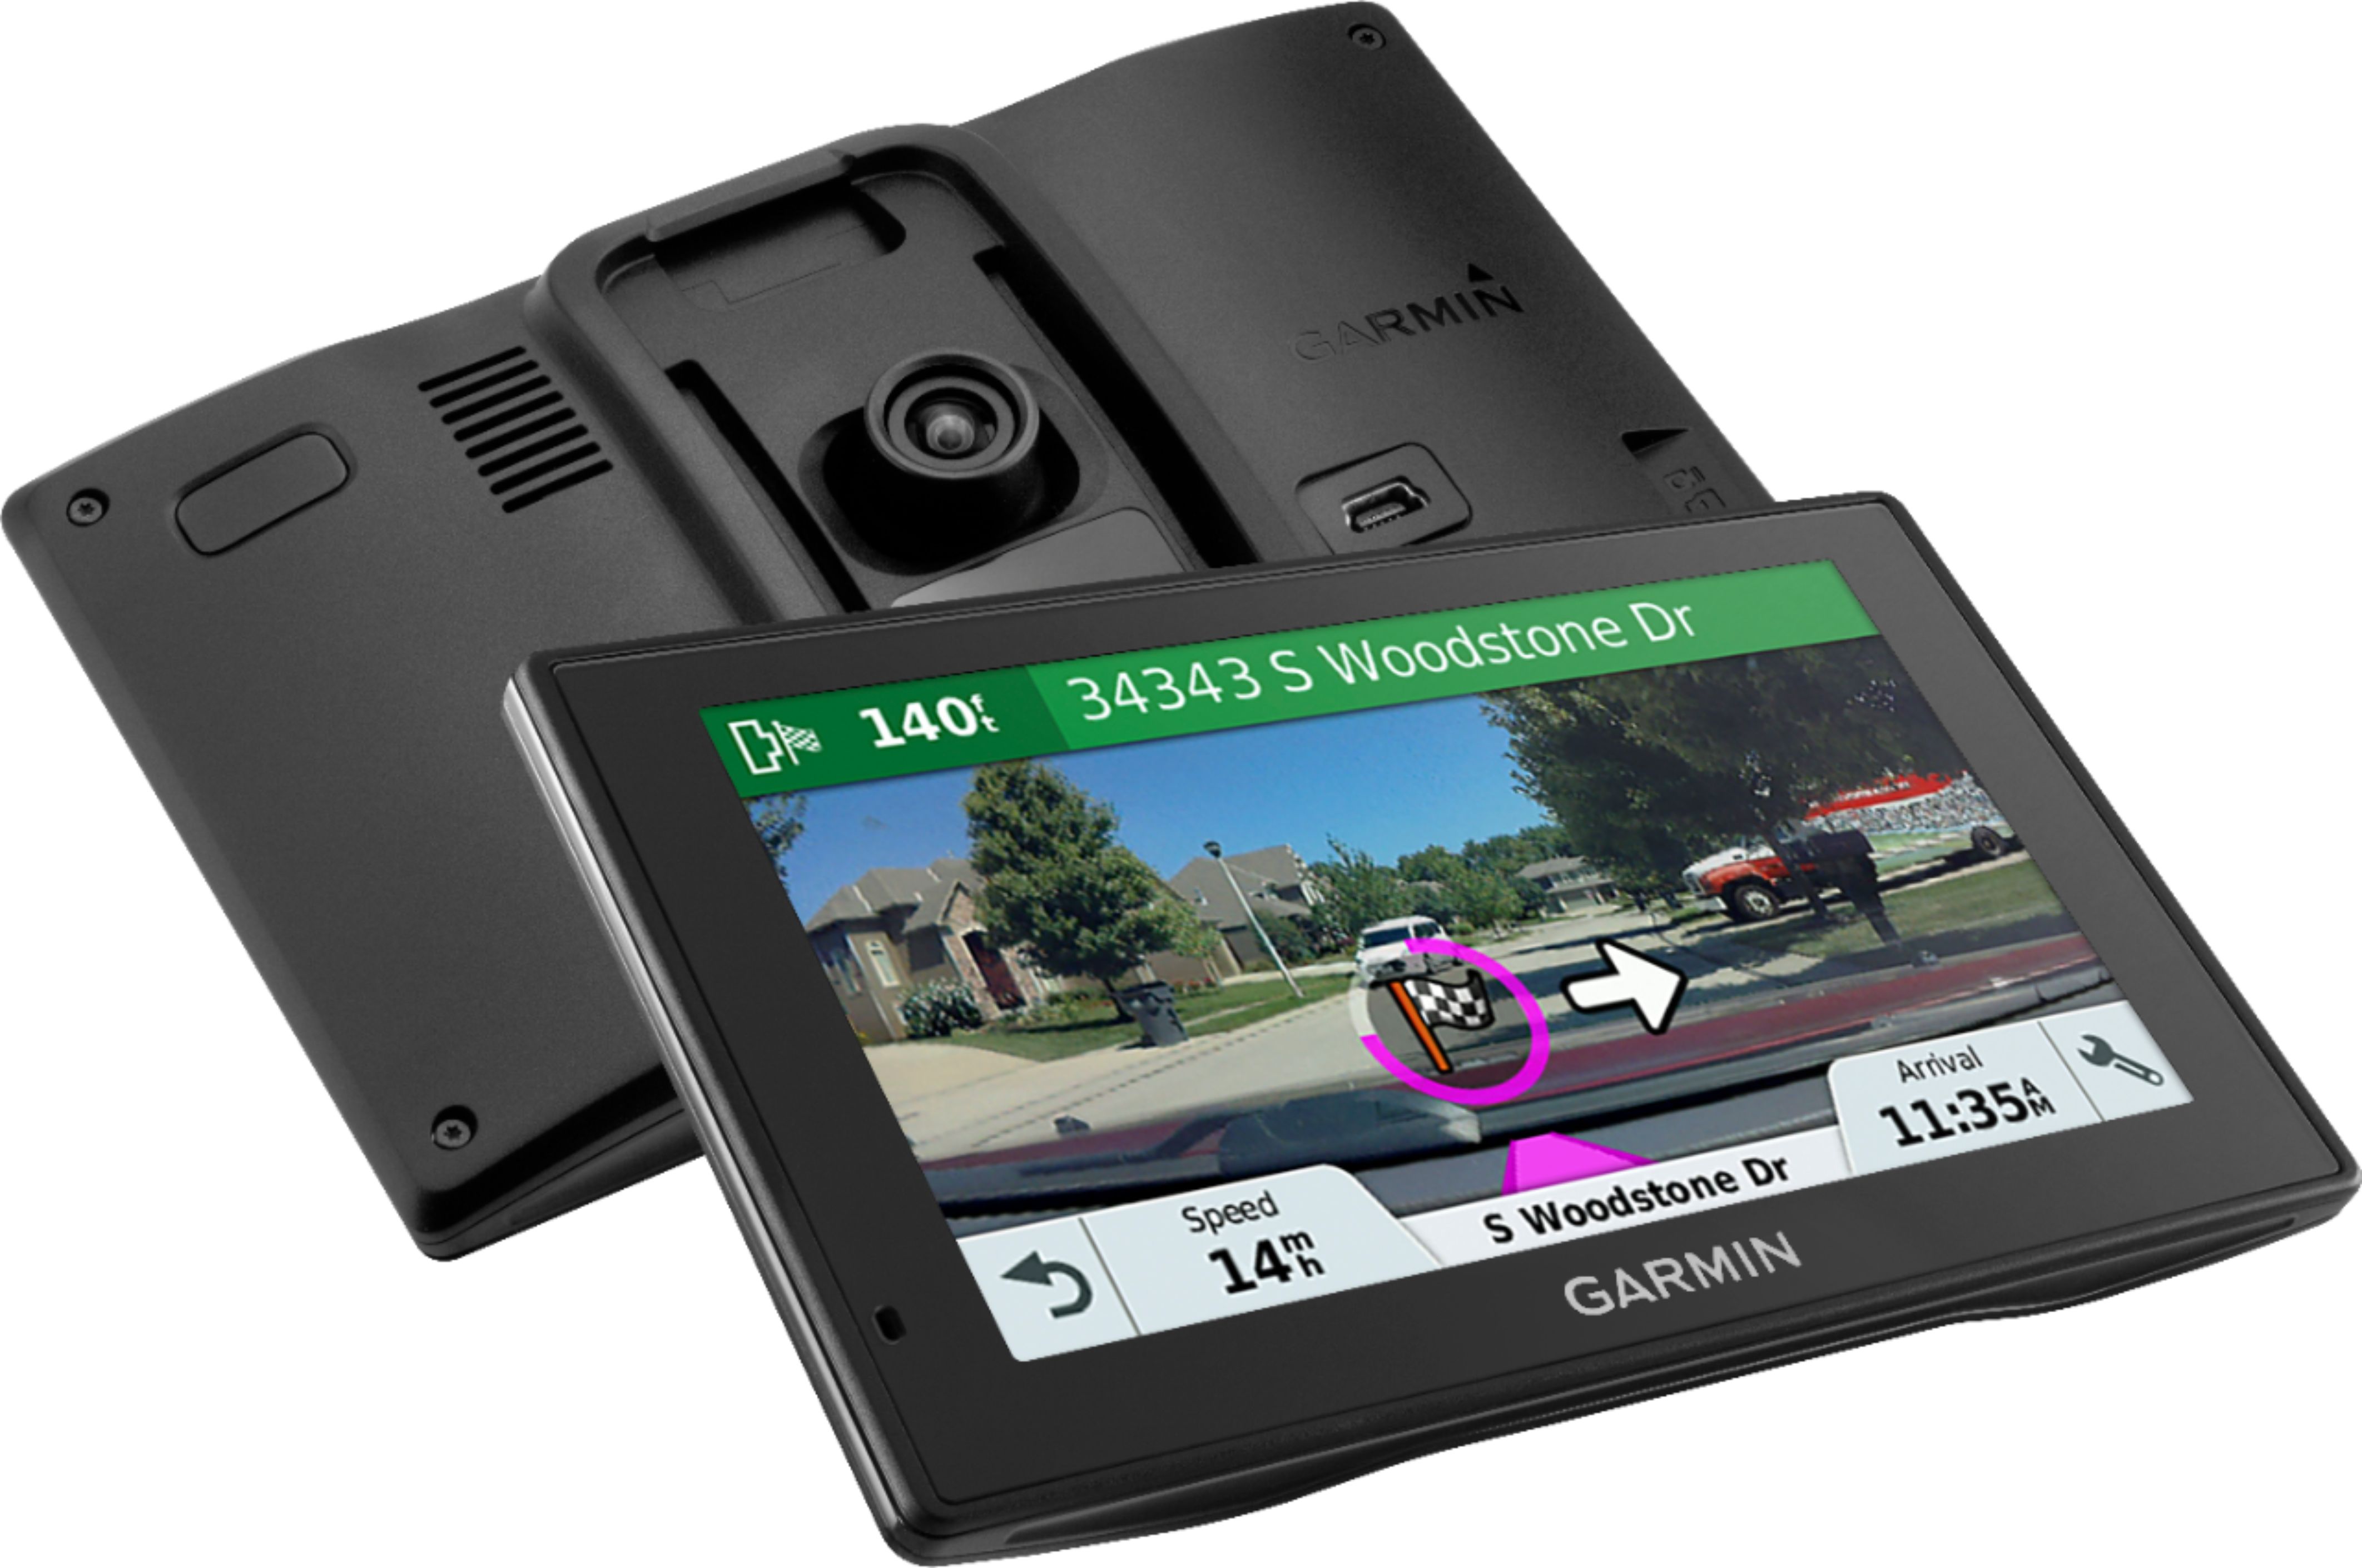 Manners farmaceut Derbeville test Best Buy: Garmin DriveAssist 51 LMT-S 5" GPS with Built-In Camera and  Bluetooth Black 010-01682-02